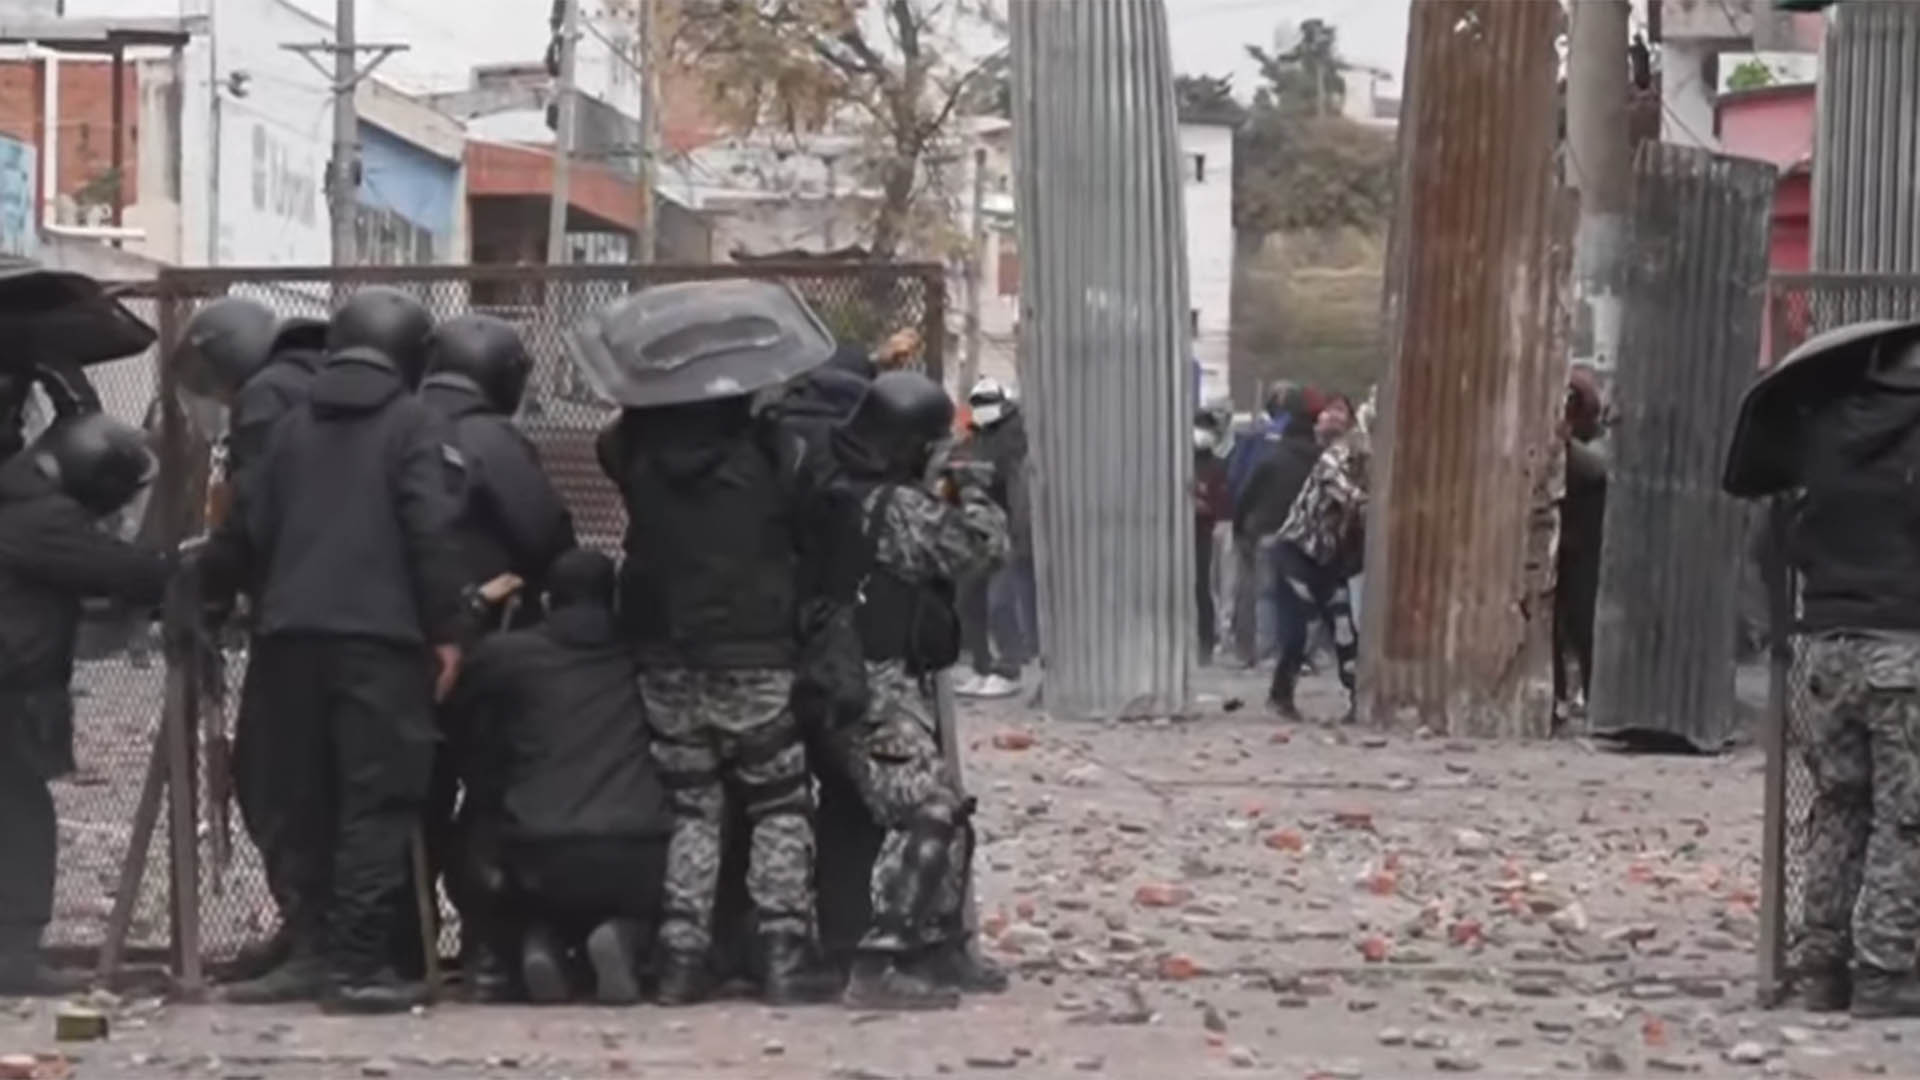 The security forces of Jujuy intervened due to the demonstrations in the center of San Salvador